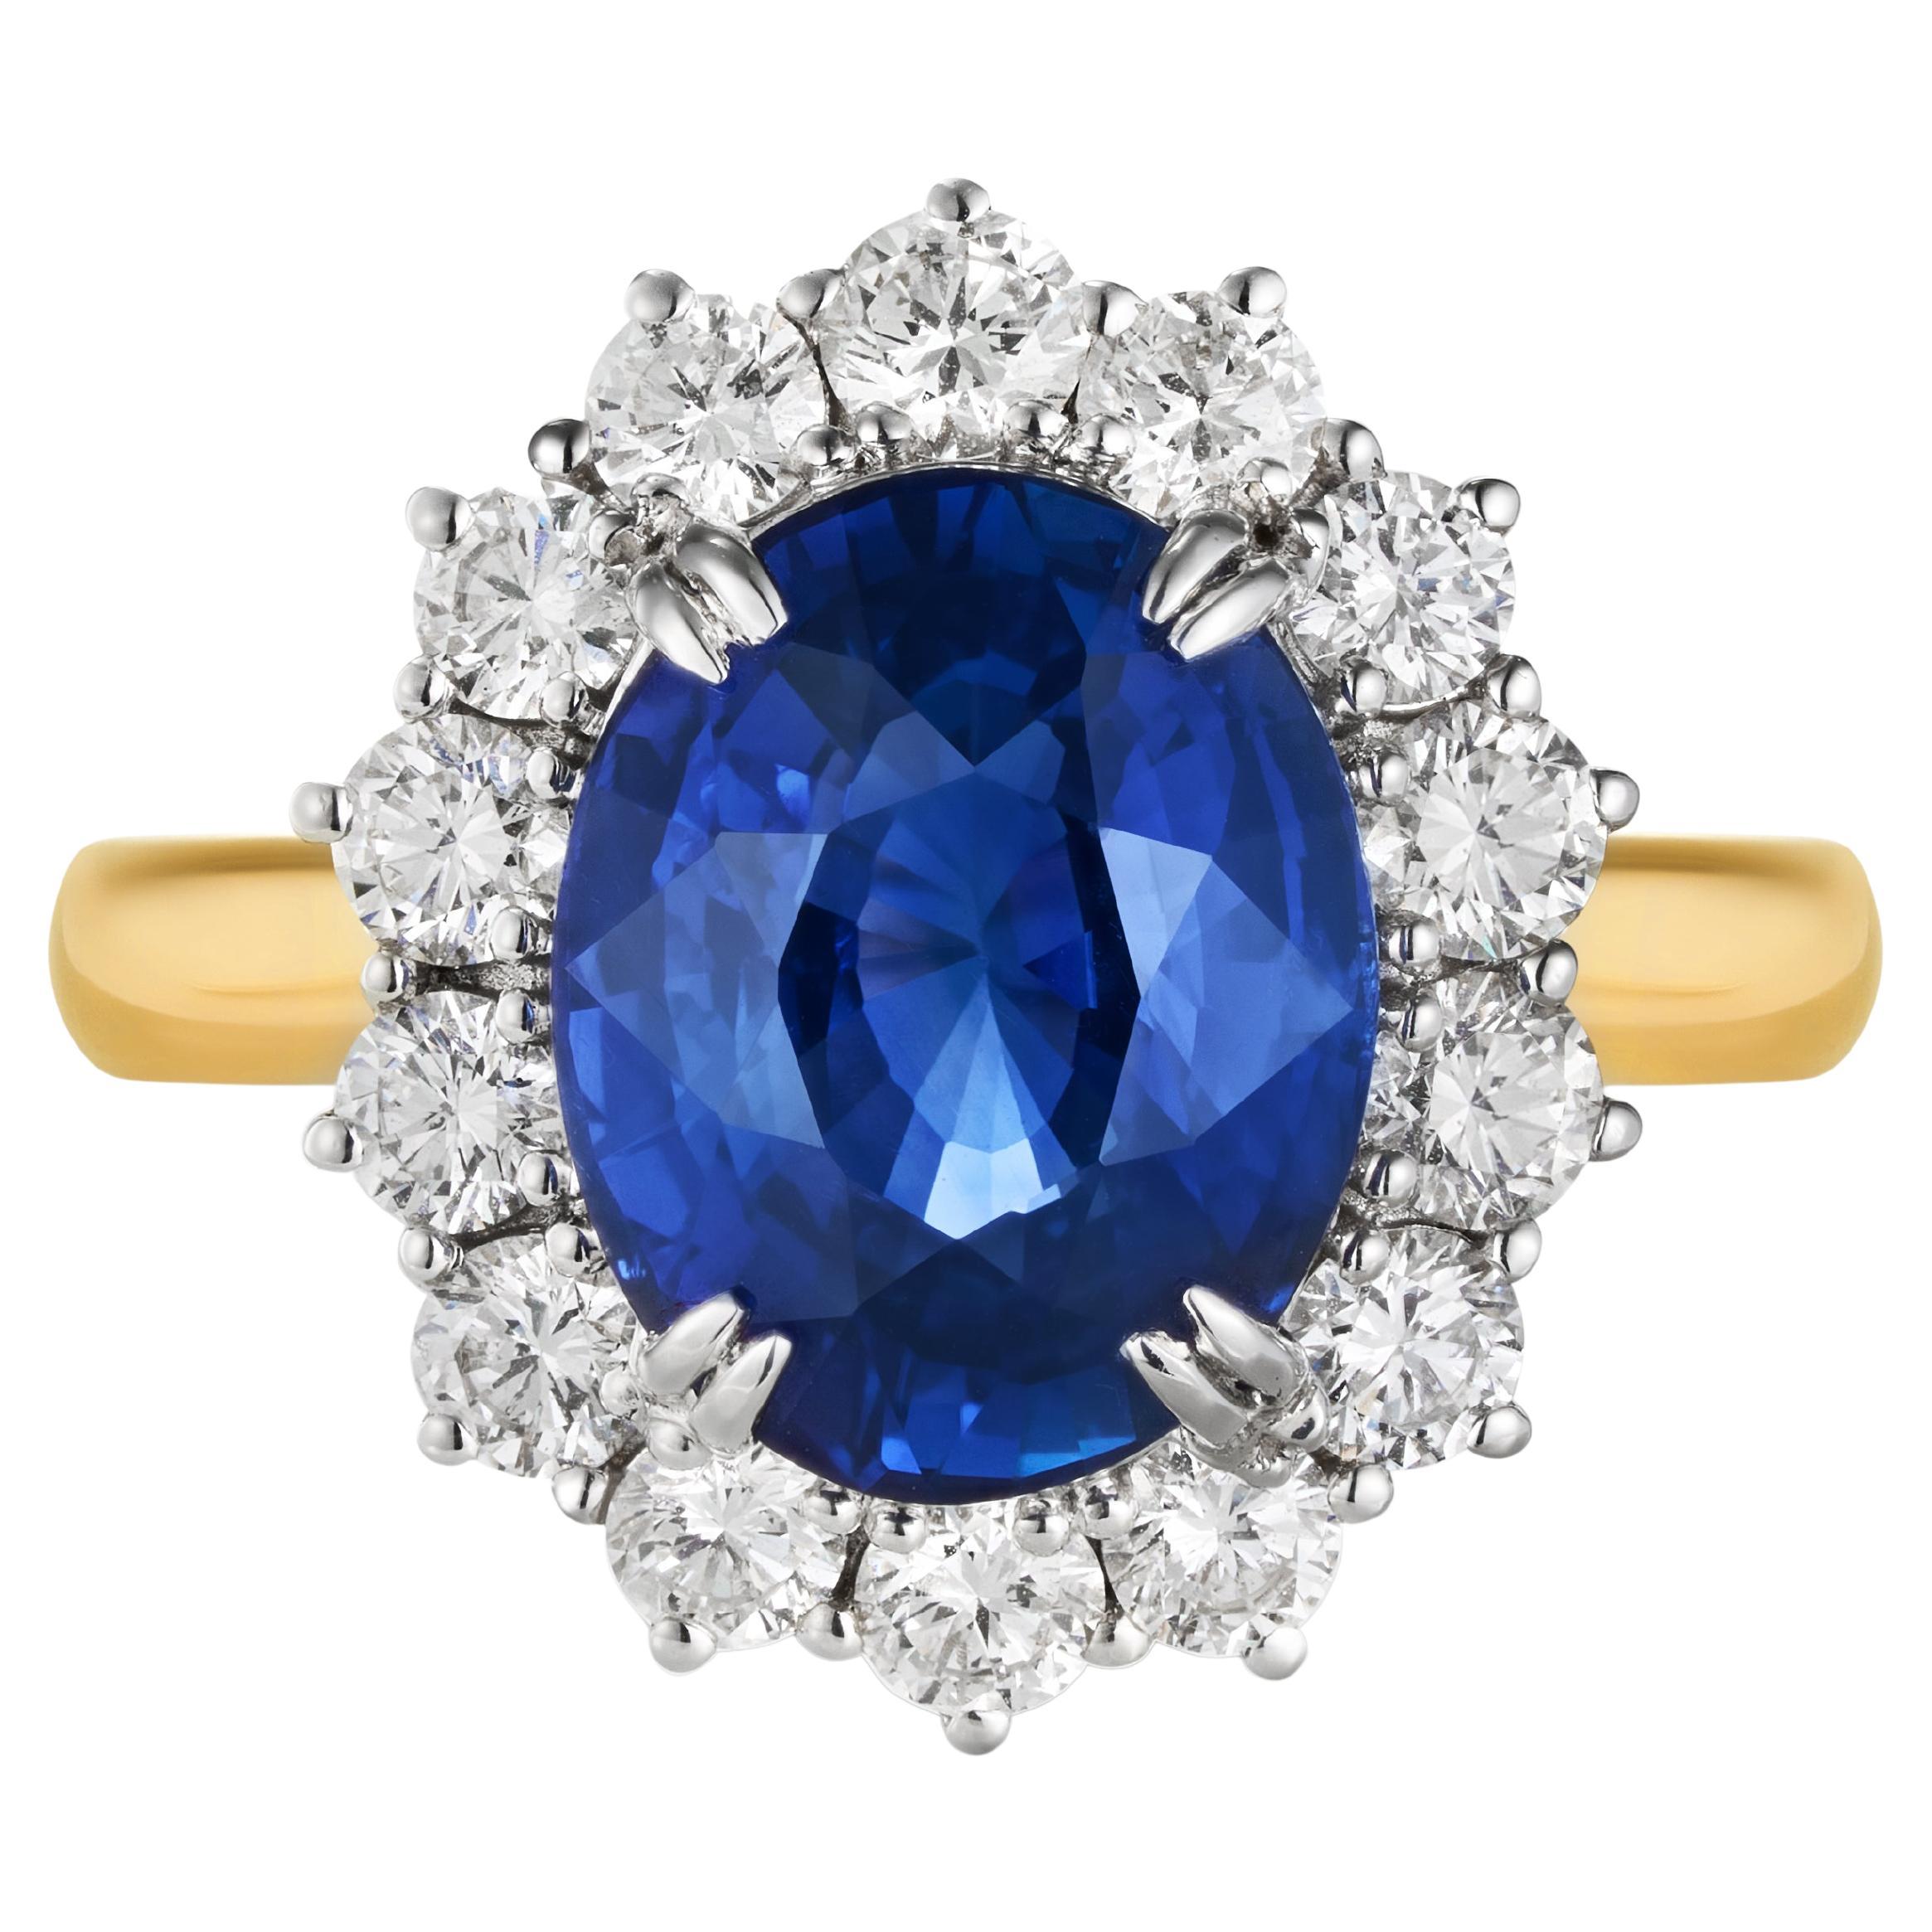 5 Carat Natural Royal Blue Sapphire Diamond Ring For Sale